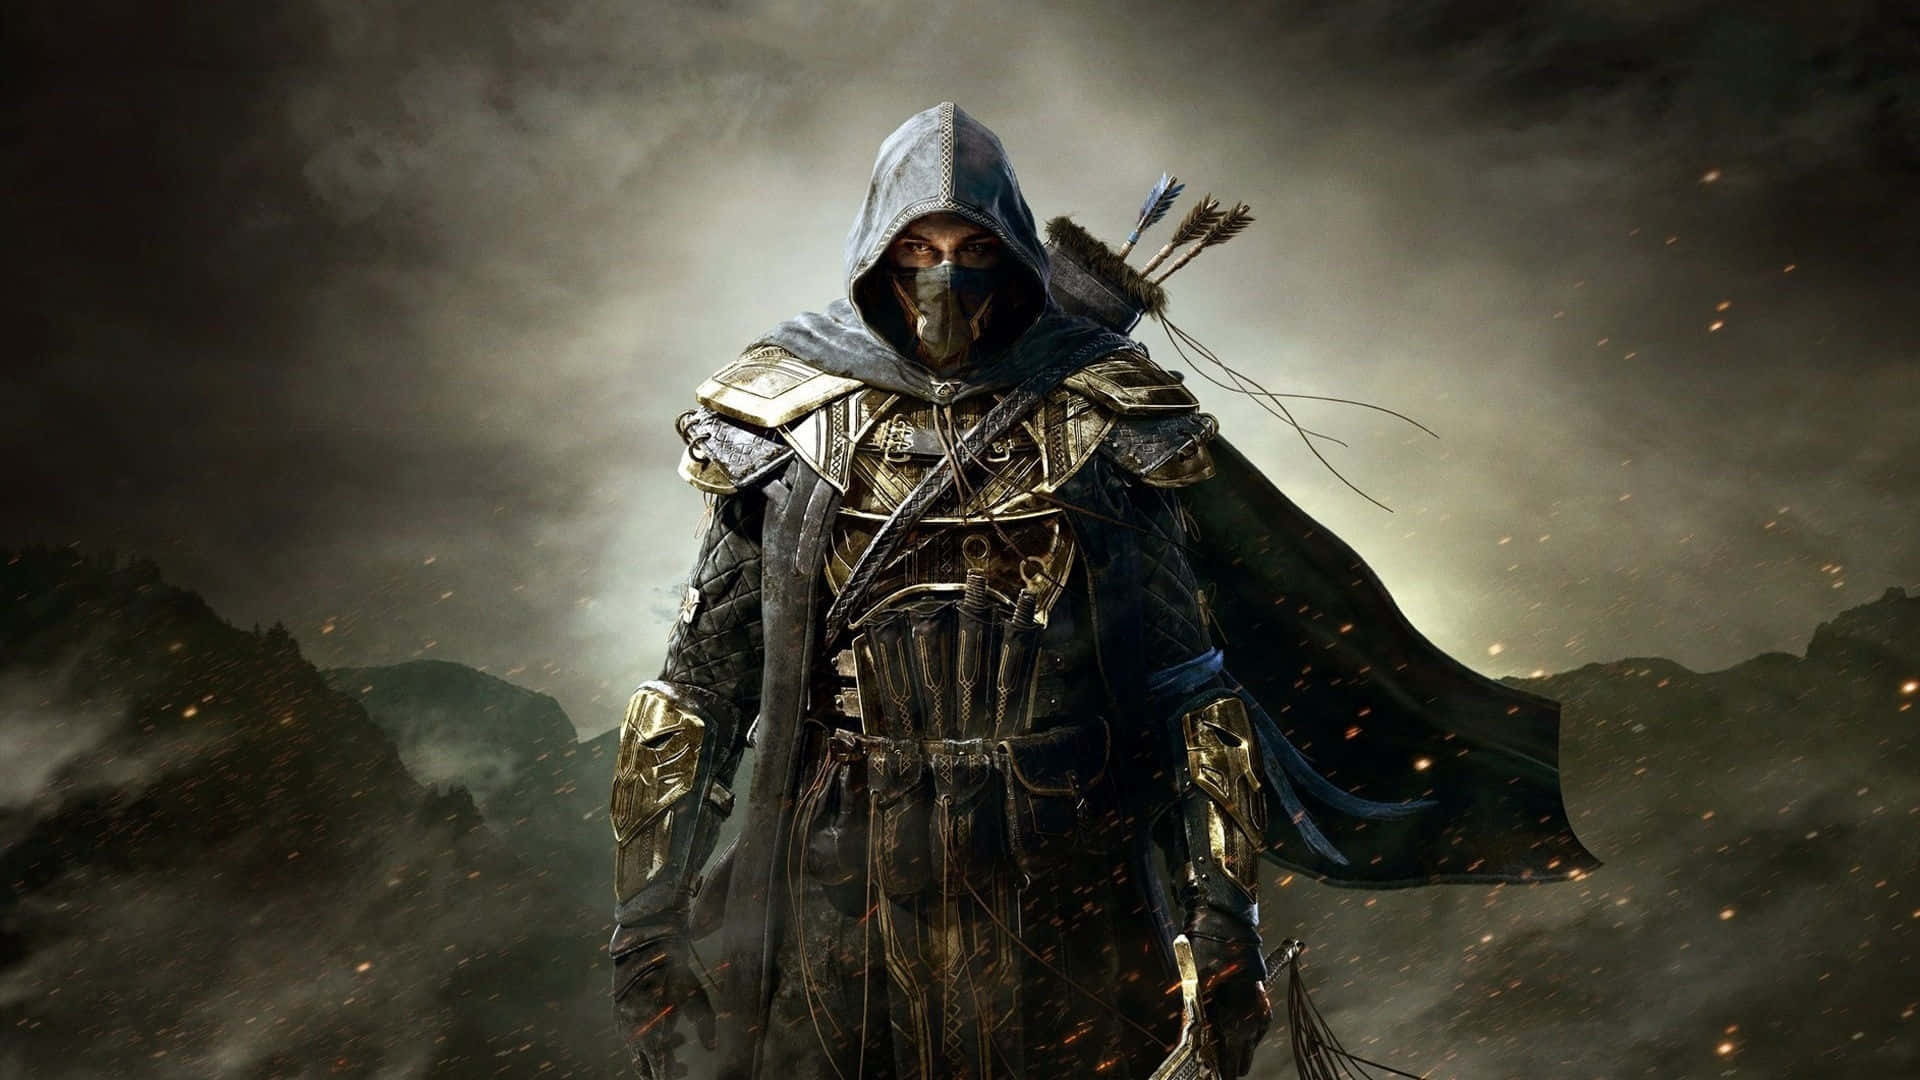 Awesome Hd Gaming The Elder Scrolls Wallpaper